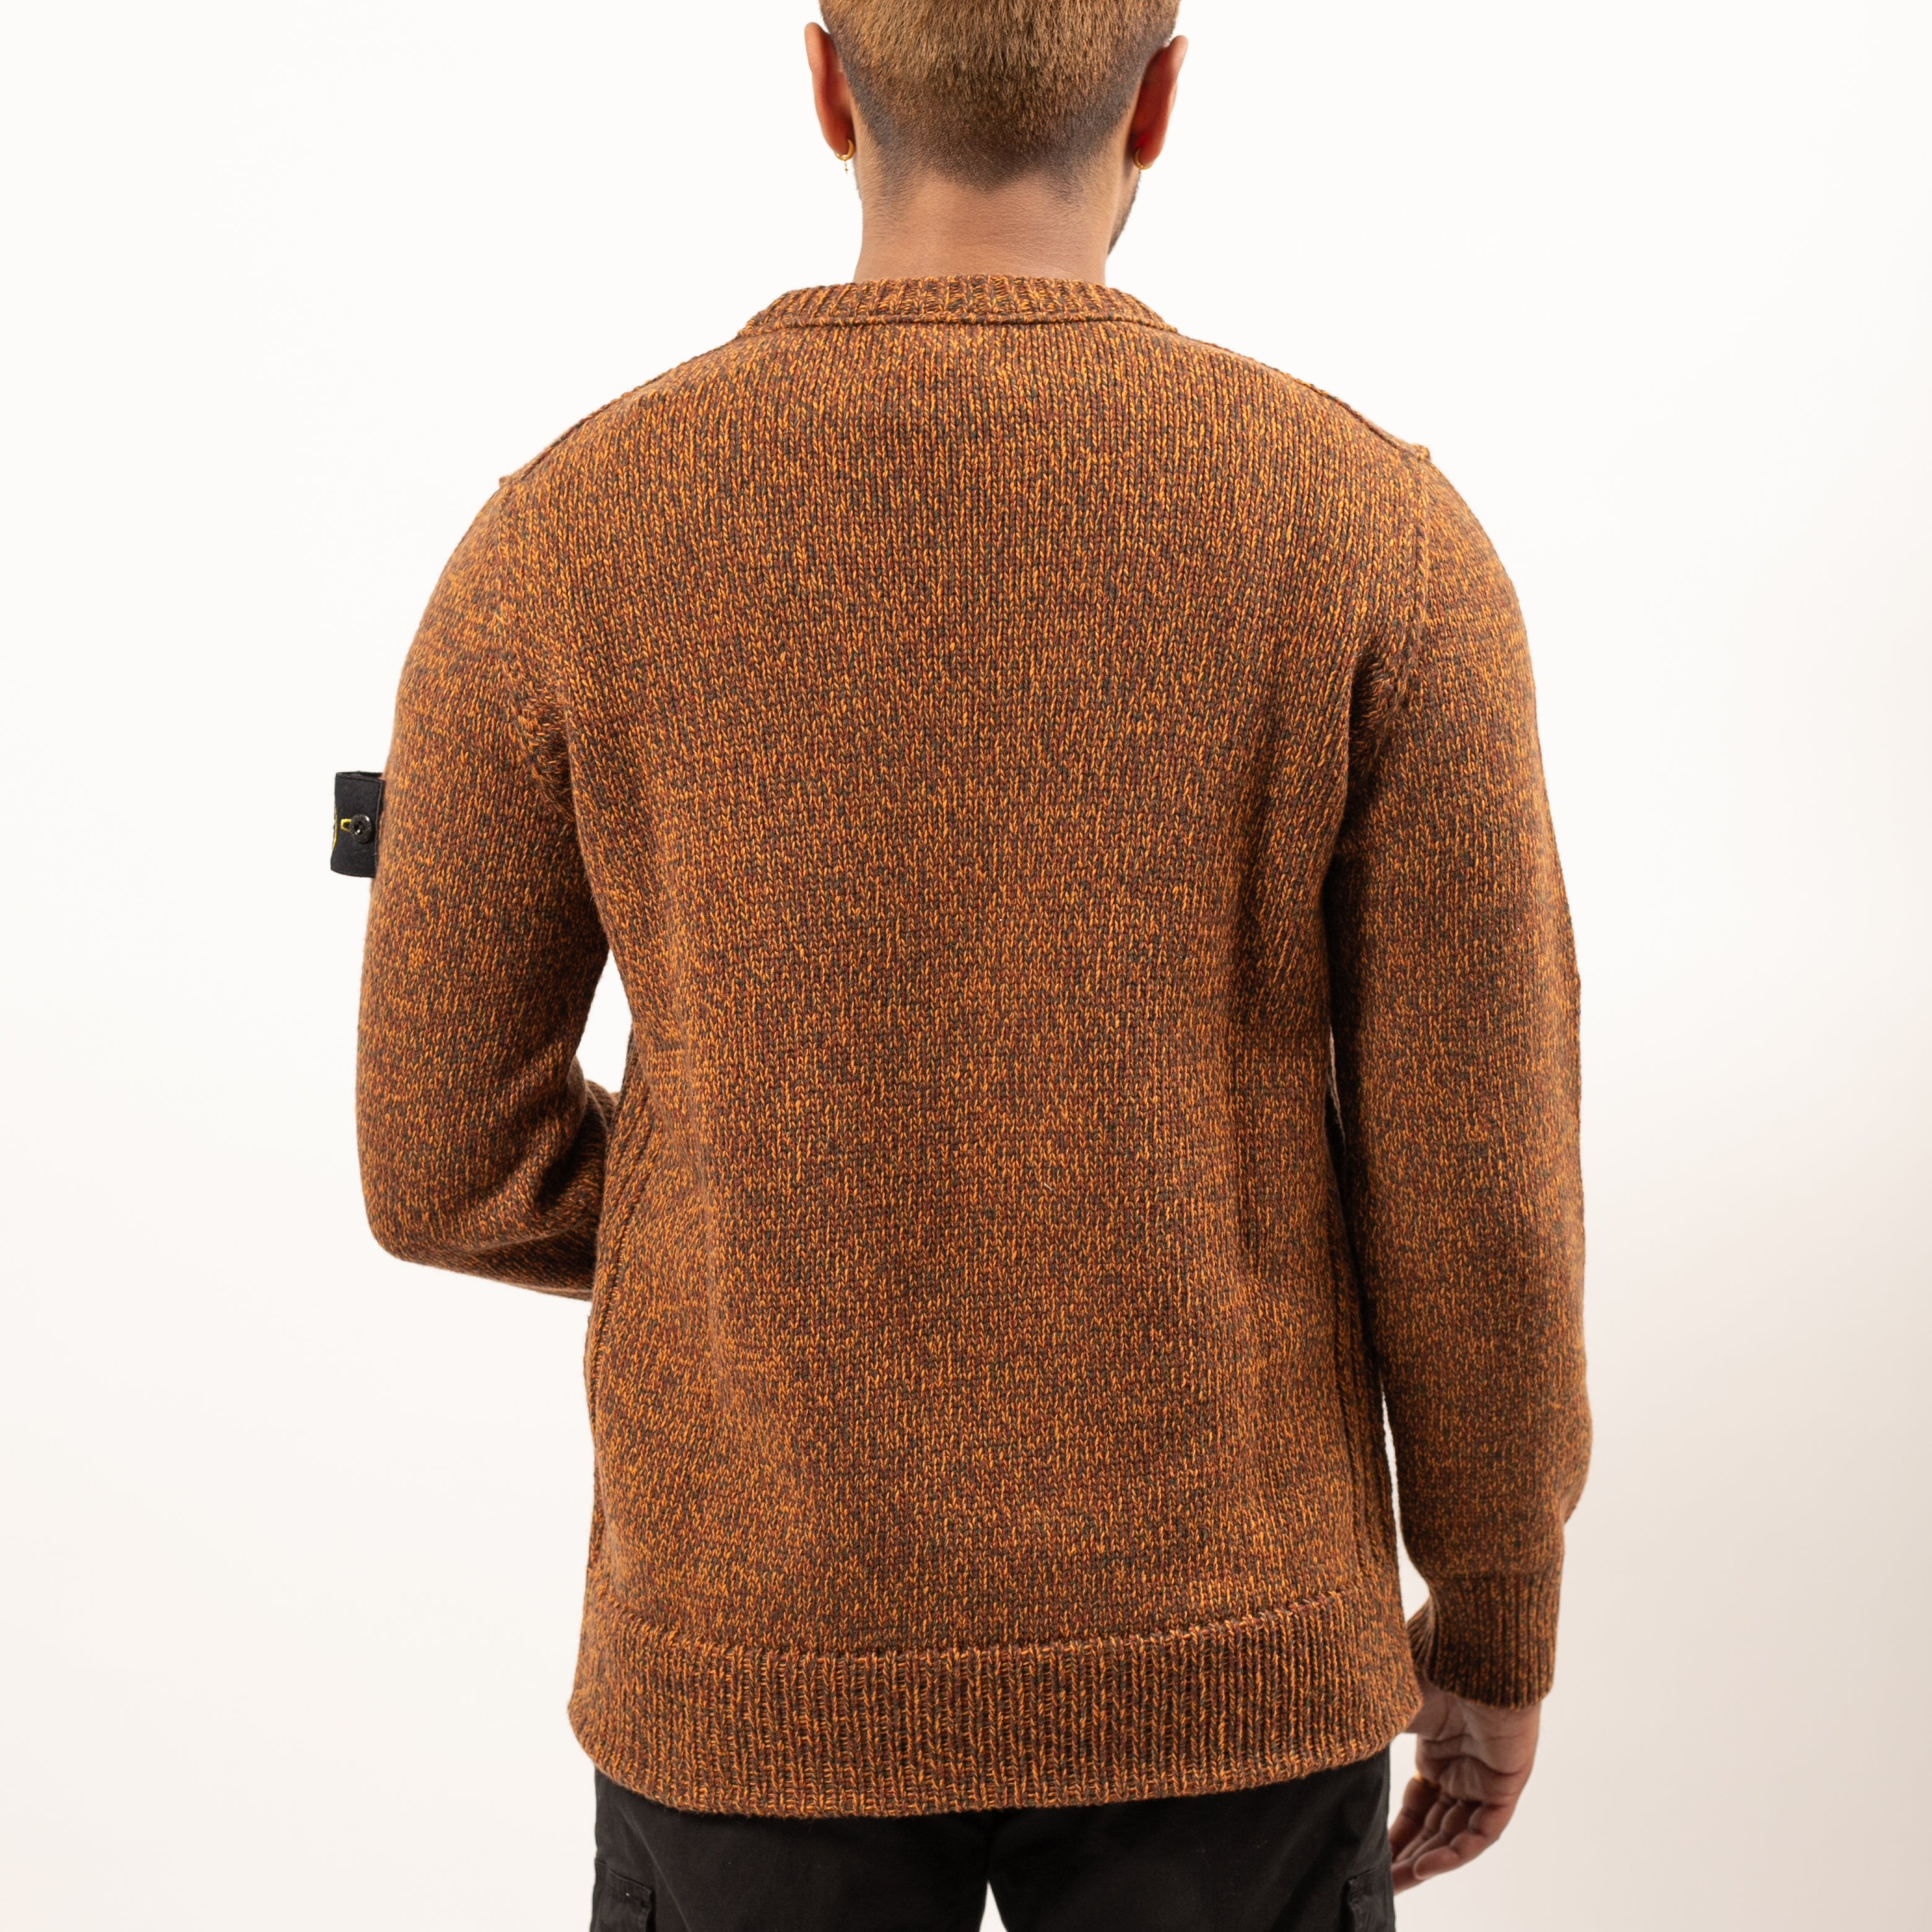 Knitted Sweater Marled - Rust 1379